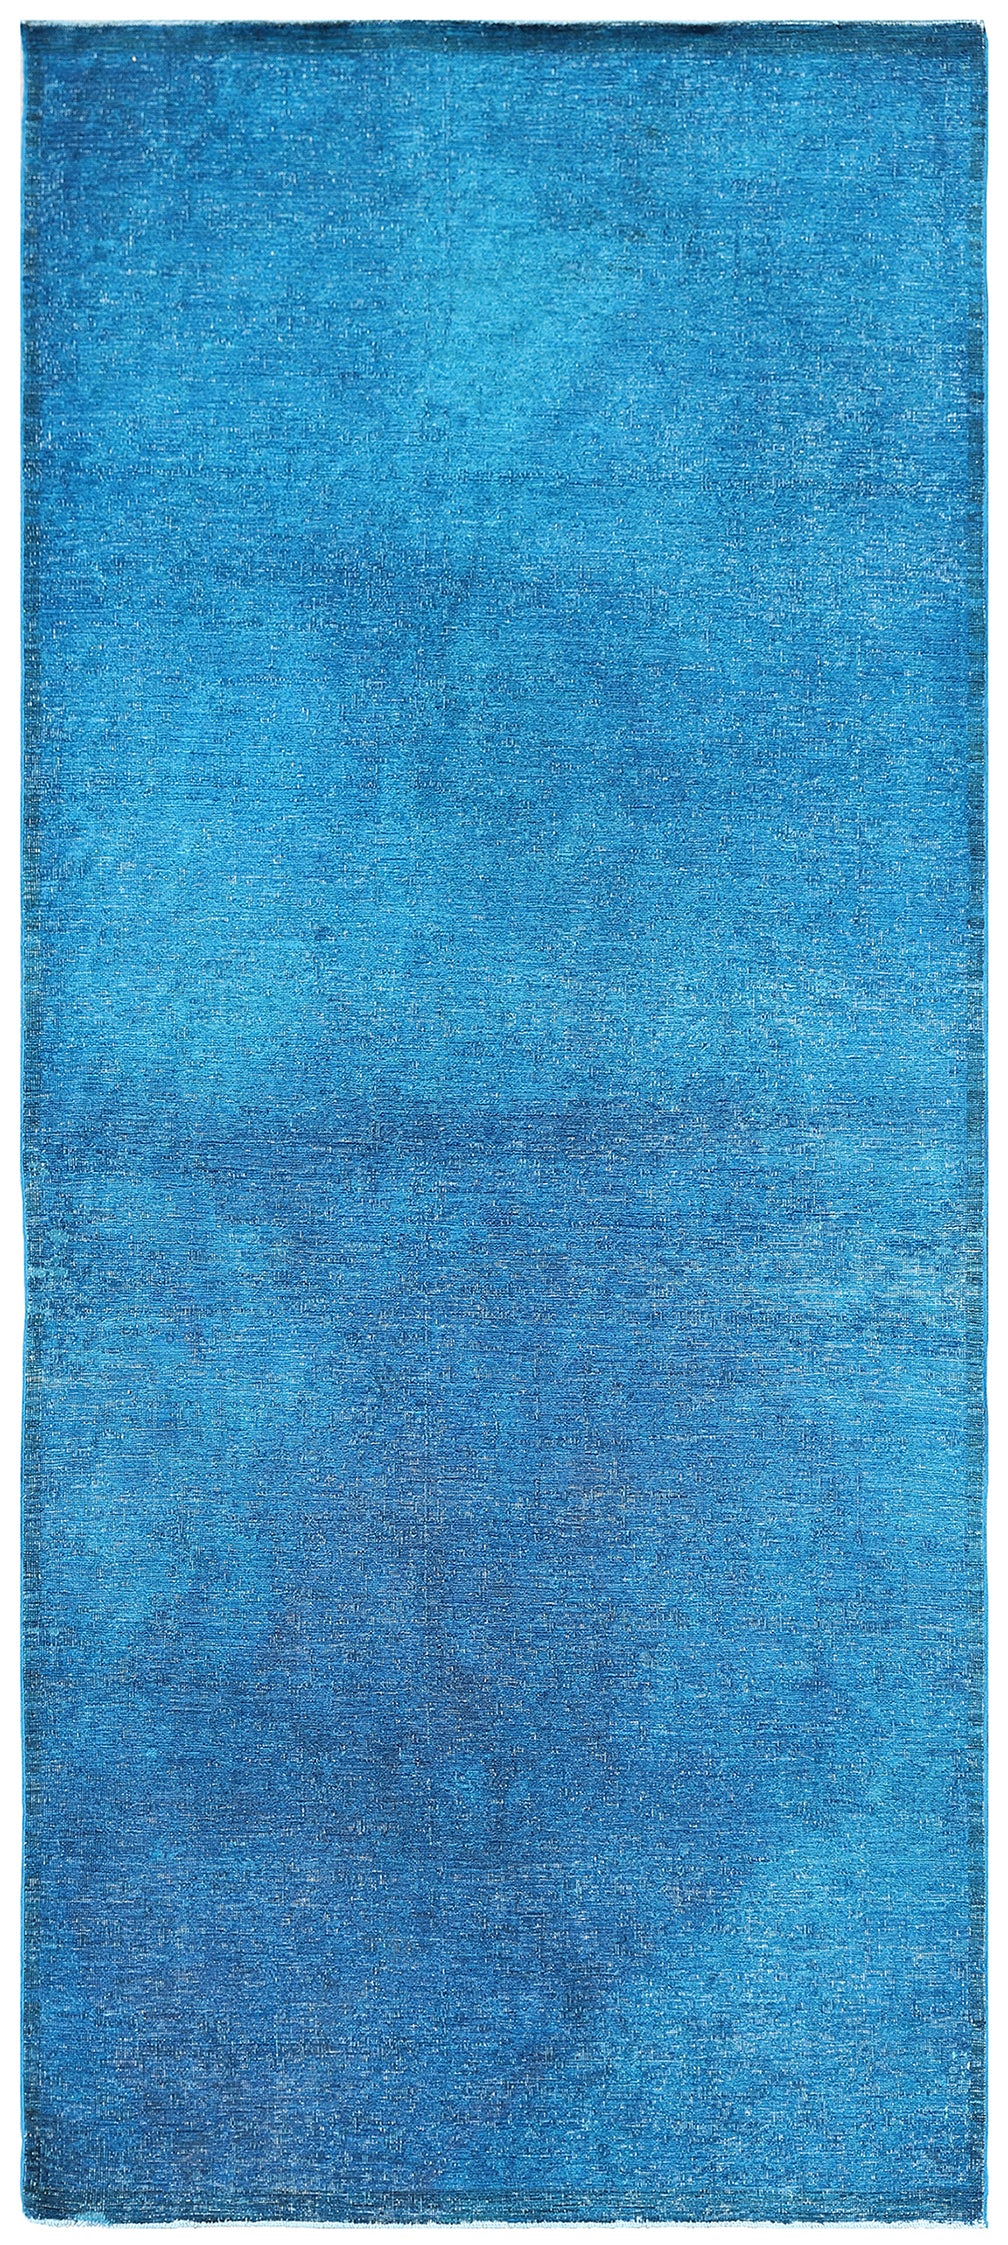 4'x9' solid Blue Ariana Overdyed Runner Rug